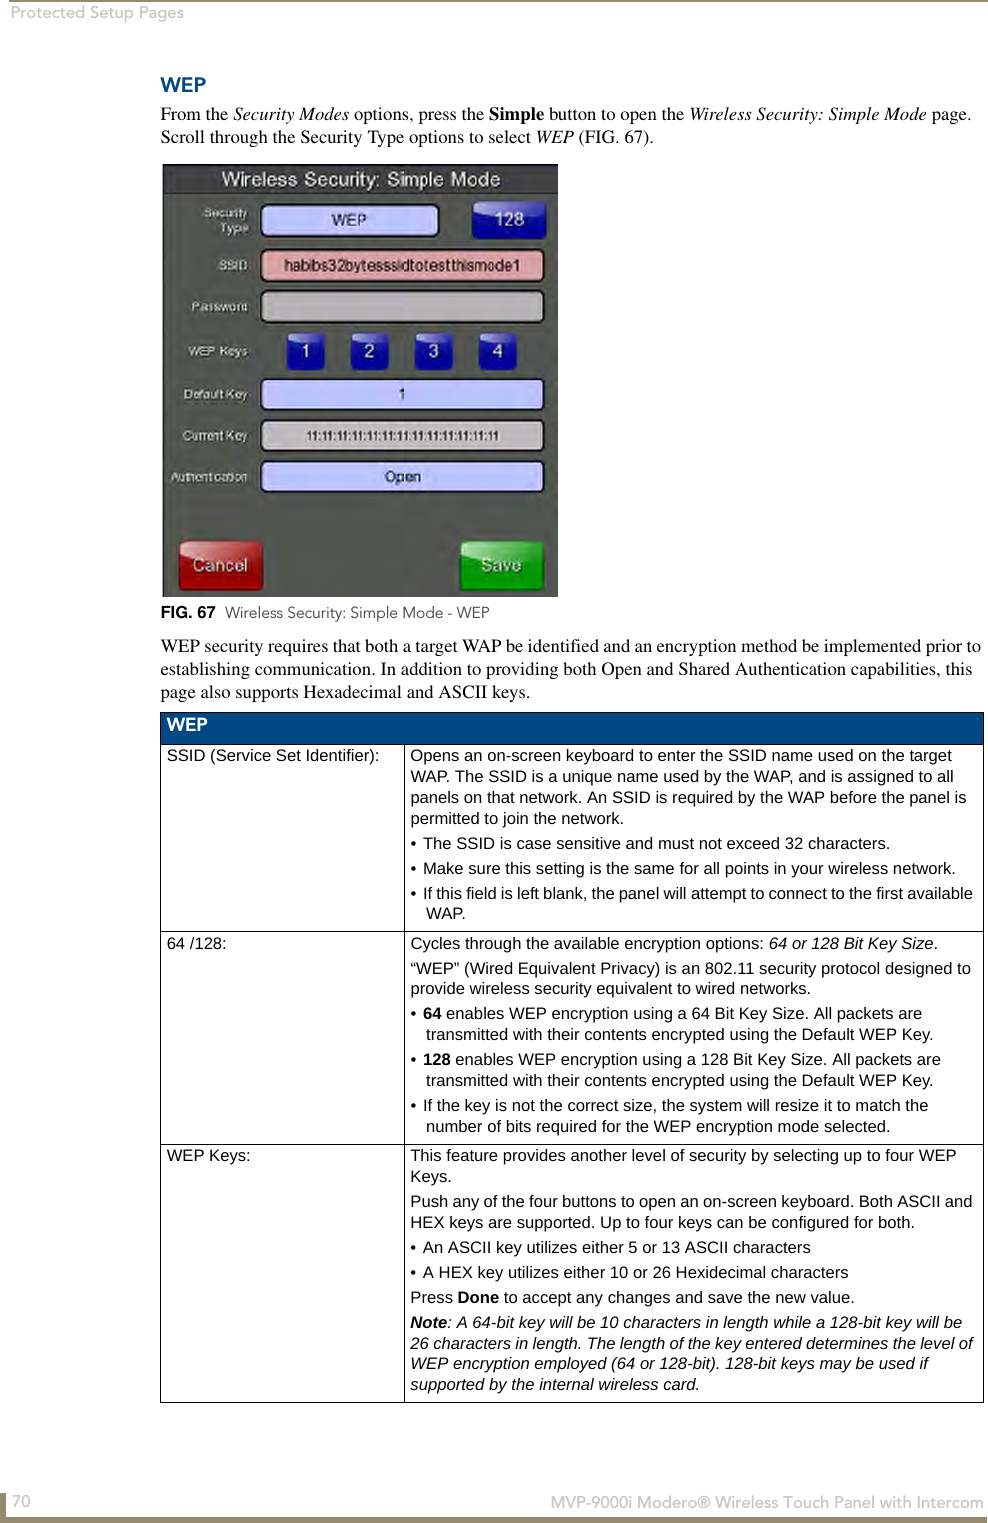 Protected Setup Pages70  MVP-9000i Modero® Wireless Touch Panel with IntercomWEPFrom the Security Modes options, press the Simple button to open the Wireless Security: Simple Mode page. Scroll through the Security Type options to select WEP (FIG. 67).  WEP security requires that both a target WAP be identified and an encryption method be implemented prior to establishing communication. In addition to providing both Open and Shared Authentication capabilities, this page also supports Hexadecimal and ASCII keys.  FIG. 67  Wireless Security: Simple Mode - WEP WEPSSID (Service Set Identifier): Opens an on-screen keyboard to enter the SSID name used on the target WAP. The SSID is a unique name used by the WAP, and is assigned to all panels on that network. An SSID is required by the WAP before the panel is permitted to join the network. • The SSID is case sensitive and must not exceed 32 characters. • Make sure this setting is the same for all points in your wireless network.• If this field is left blank, the panel will attempt to connect to the first available WAP.64 /128: Cycles through the available encryption options: 64 or 128 Bit Key Size. “WEP” (Wired Equivalent Privacy) is an 802.11 security protocol designed to provide wireless security equivalent to wired networks.•64 enables WEP encryption using a 64 Bit Key Size. All packets are transmitted with their contents encrypted using the Default WEP Key.•128 enables WEP encryption using a 128 Bit Key Size. All packets are transmitted with their contents encrypted using the Default WEP Key.• If the key is not the correct size, the system will resize it to match the number of bits required for the WEP encryption mode selected. WEP Keys: This feature provides another level of security by selecting up to four WEP Keys. Push any of the four buttons to open an on-screen keyboard. Both ASCII and HEX keys are supported. Up to four keys can be configured for both.• An ASCII key utilizes either 5 or 13 ASCII characters• A HEX key utilizes either 10 or 26 Hexidecimal charactersPress Done to accept any changes and save the new value.Note: A 64-bit key will be 10 characters in length while a 128-bit key will be 26 characters in length. The length of the key entered determines the level of WEP encryption employed (64 or 128-bit). 128-bit keys may be used if supported by the internal wireless card.